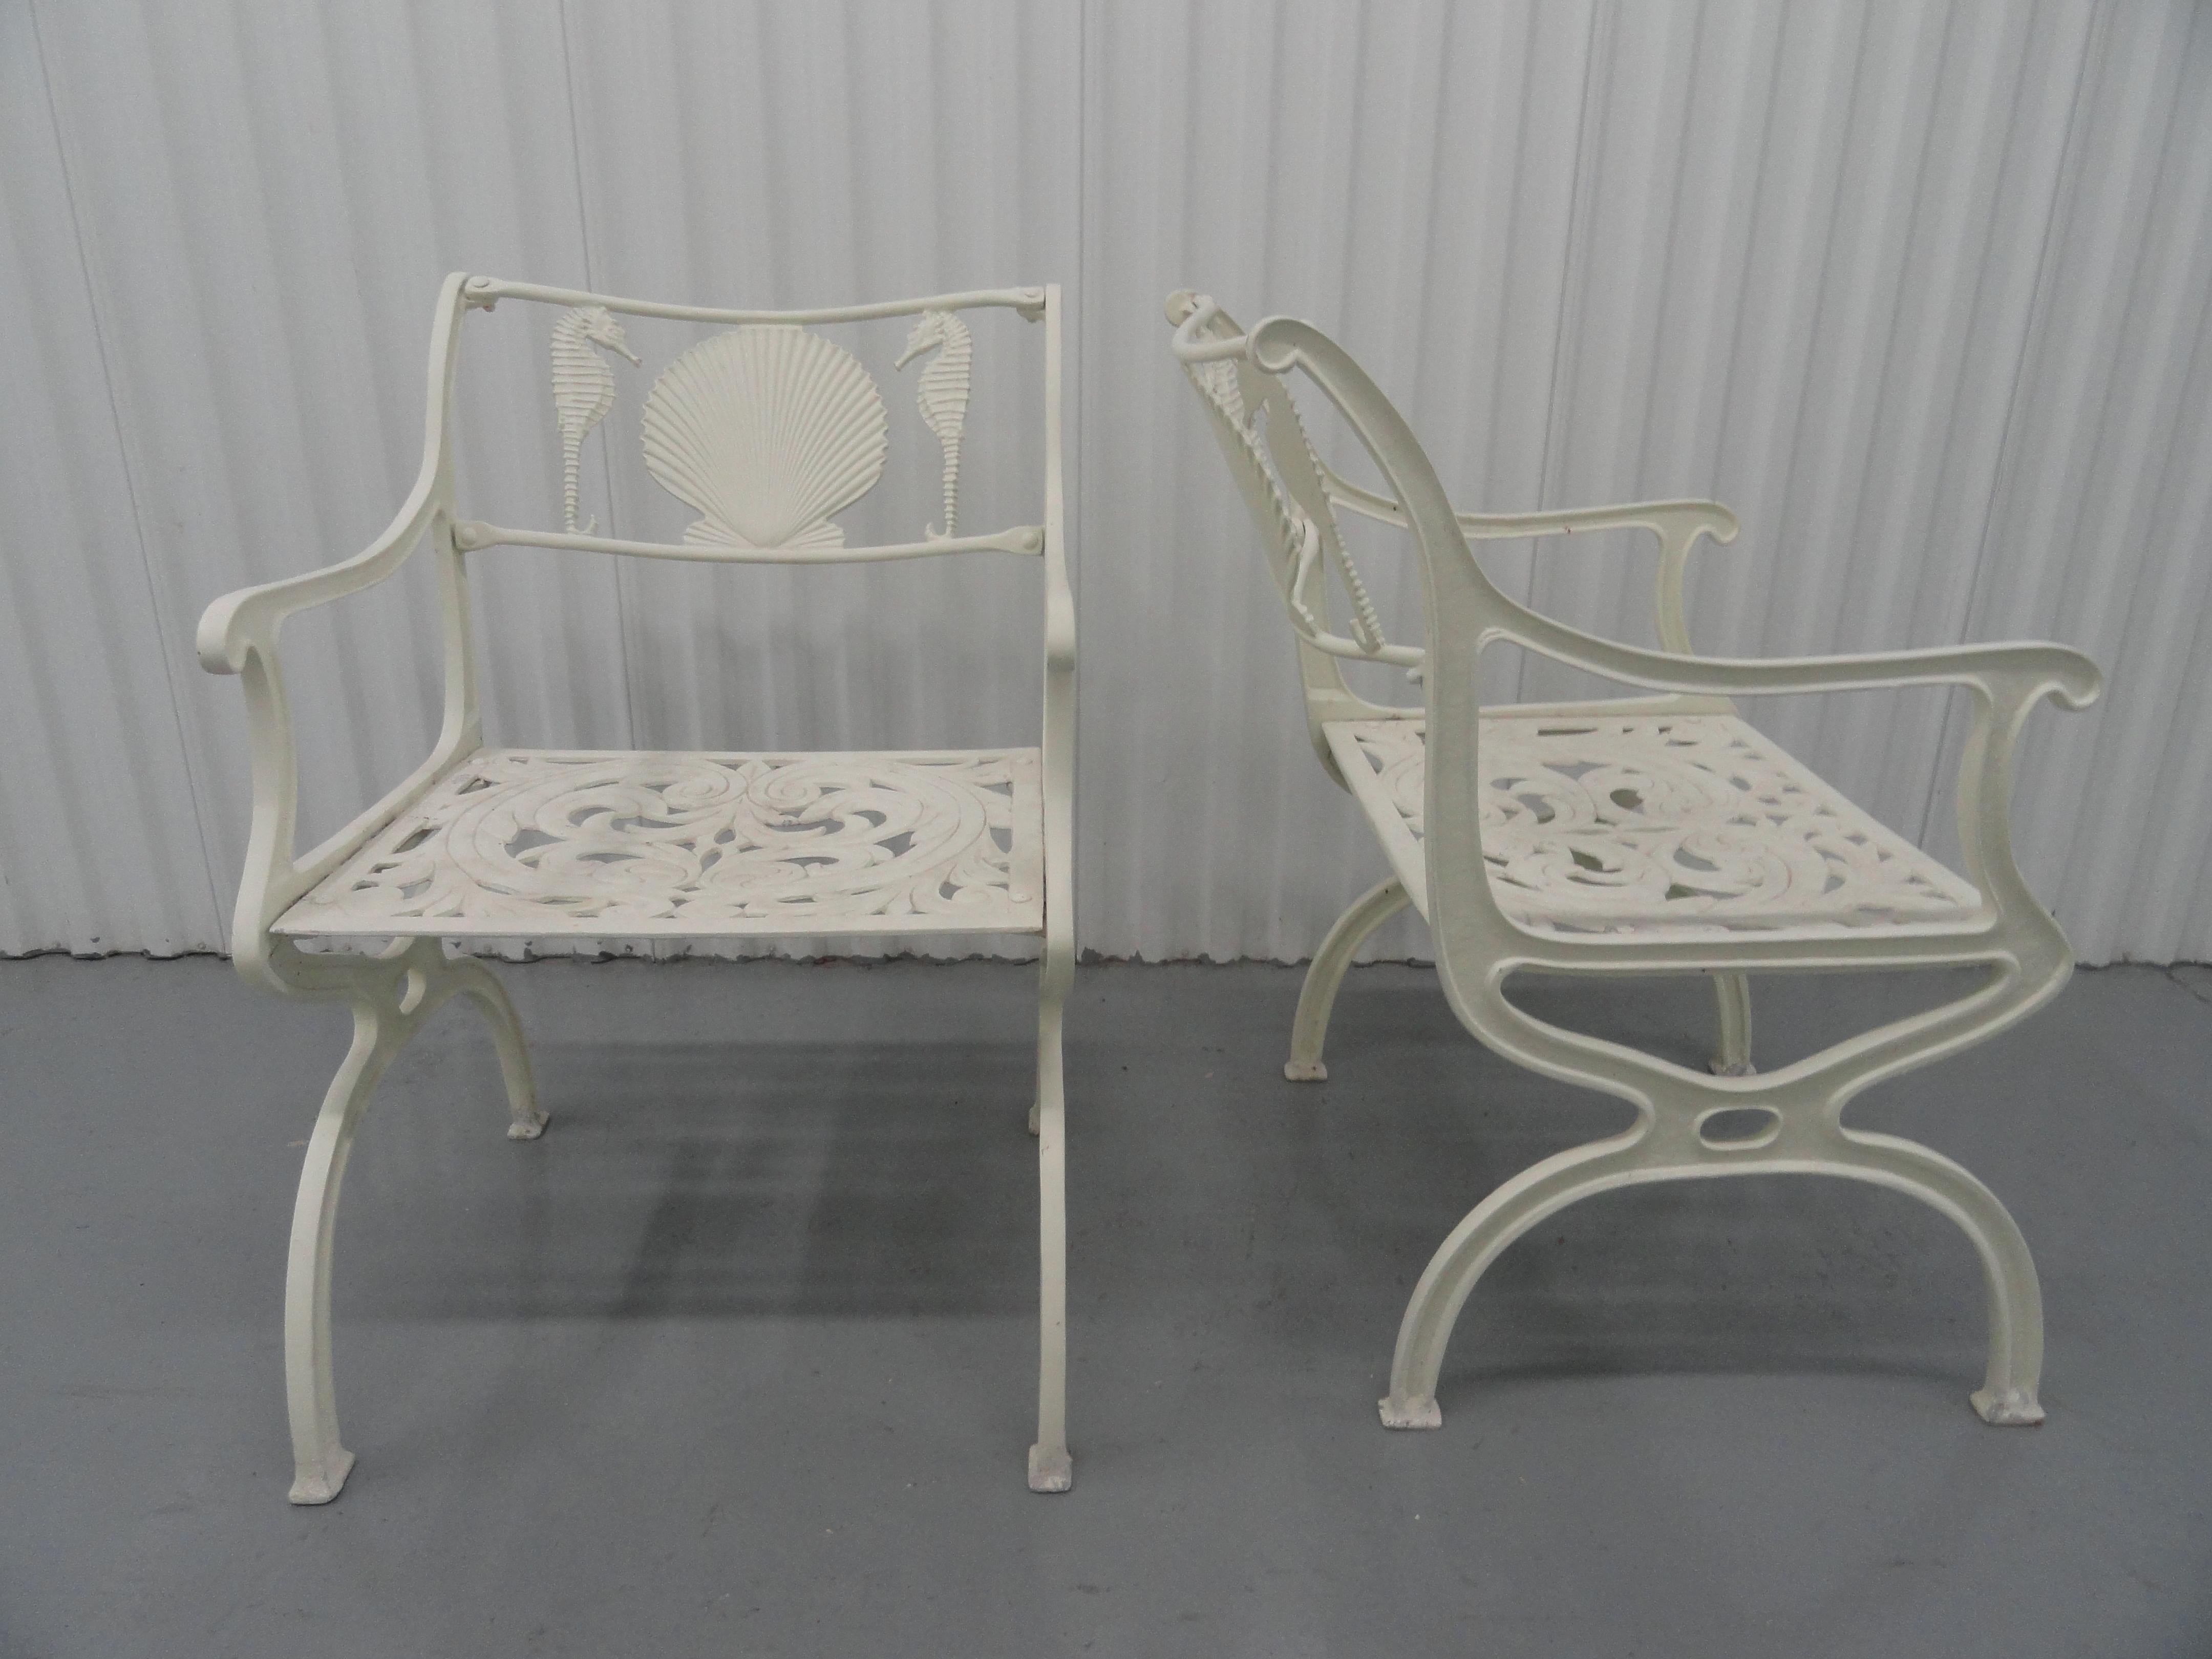 This set of two armchairs was designed and created by Molla in the 1950s. They are made of cast aluminum and are painted in a off-white finish.
There are three pairs of two available.